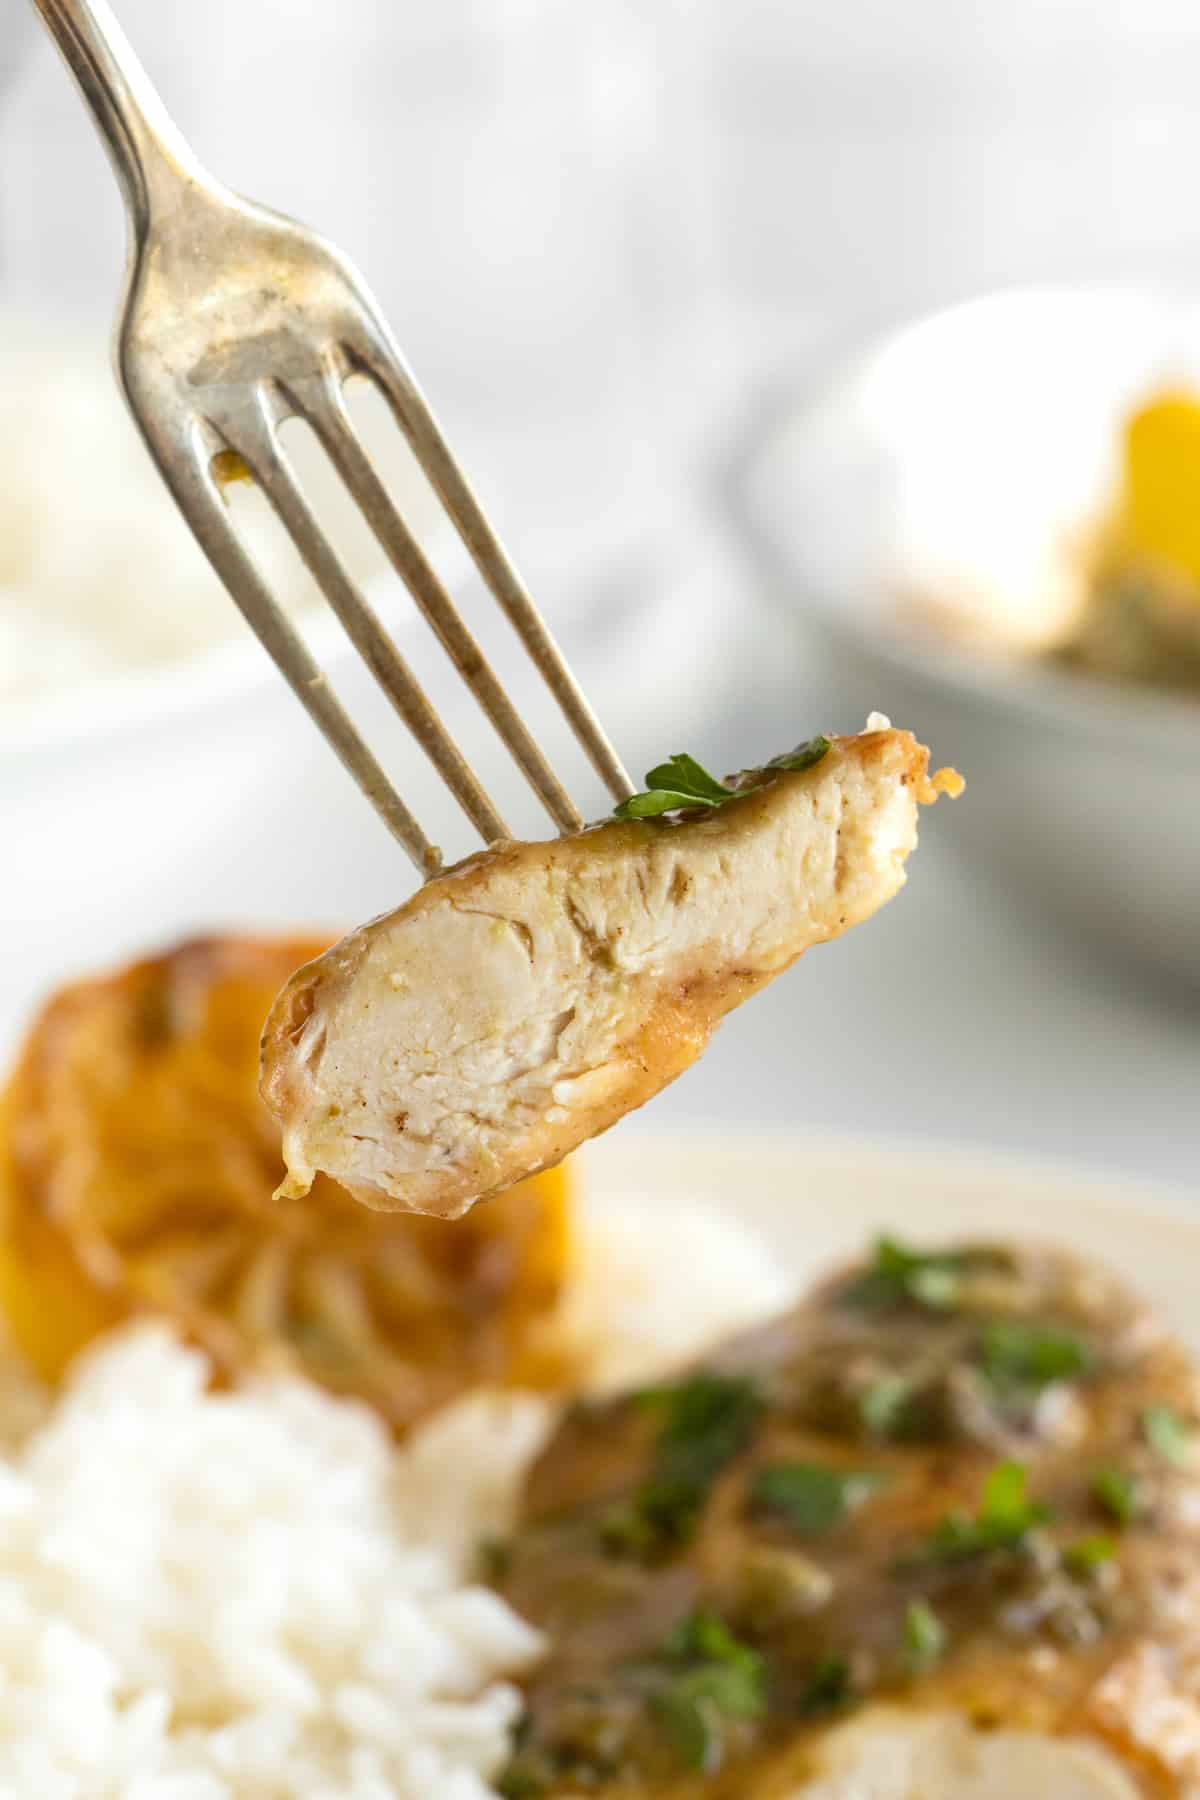 A bite of chicken breast with piccata sauce on a fork, served with white rice, half a lemon.